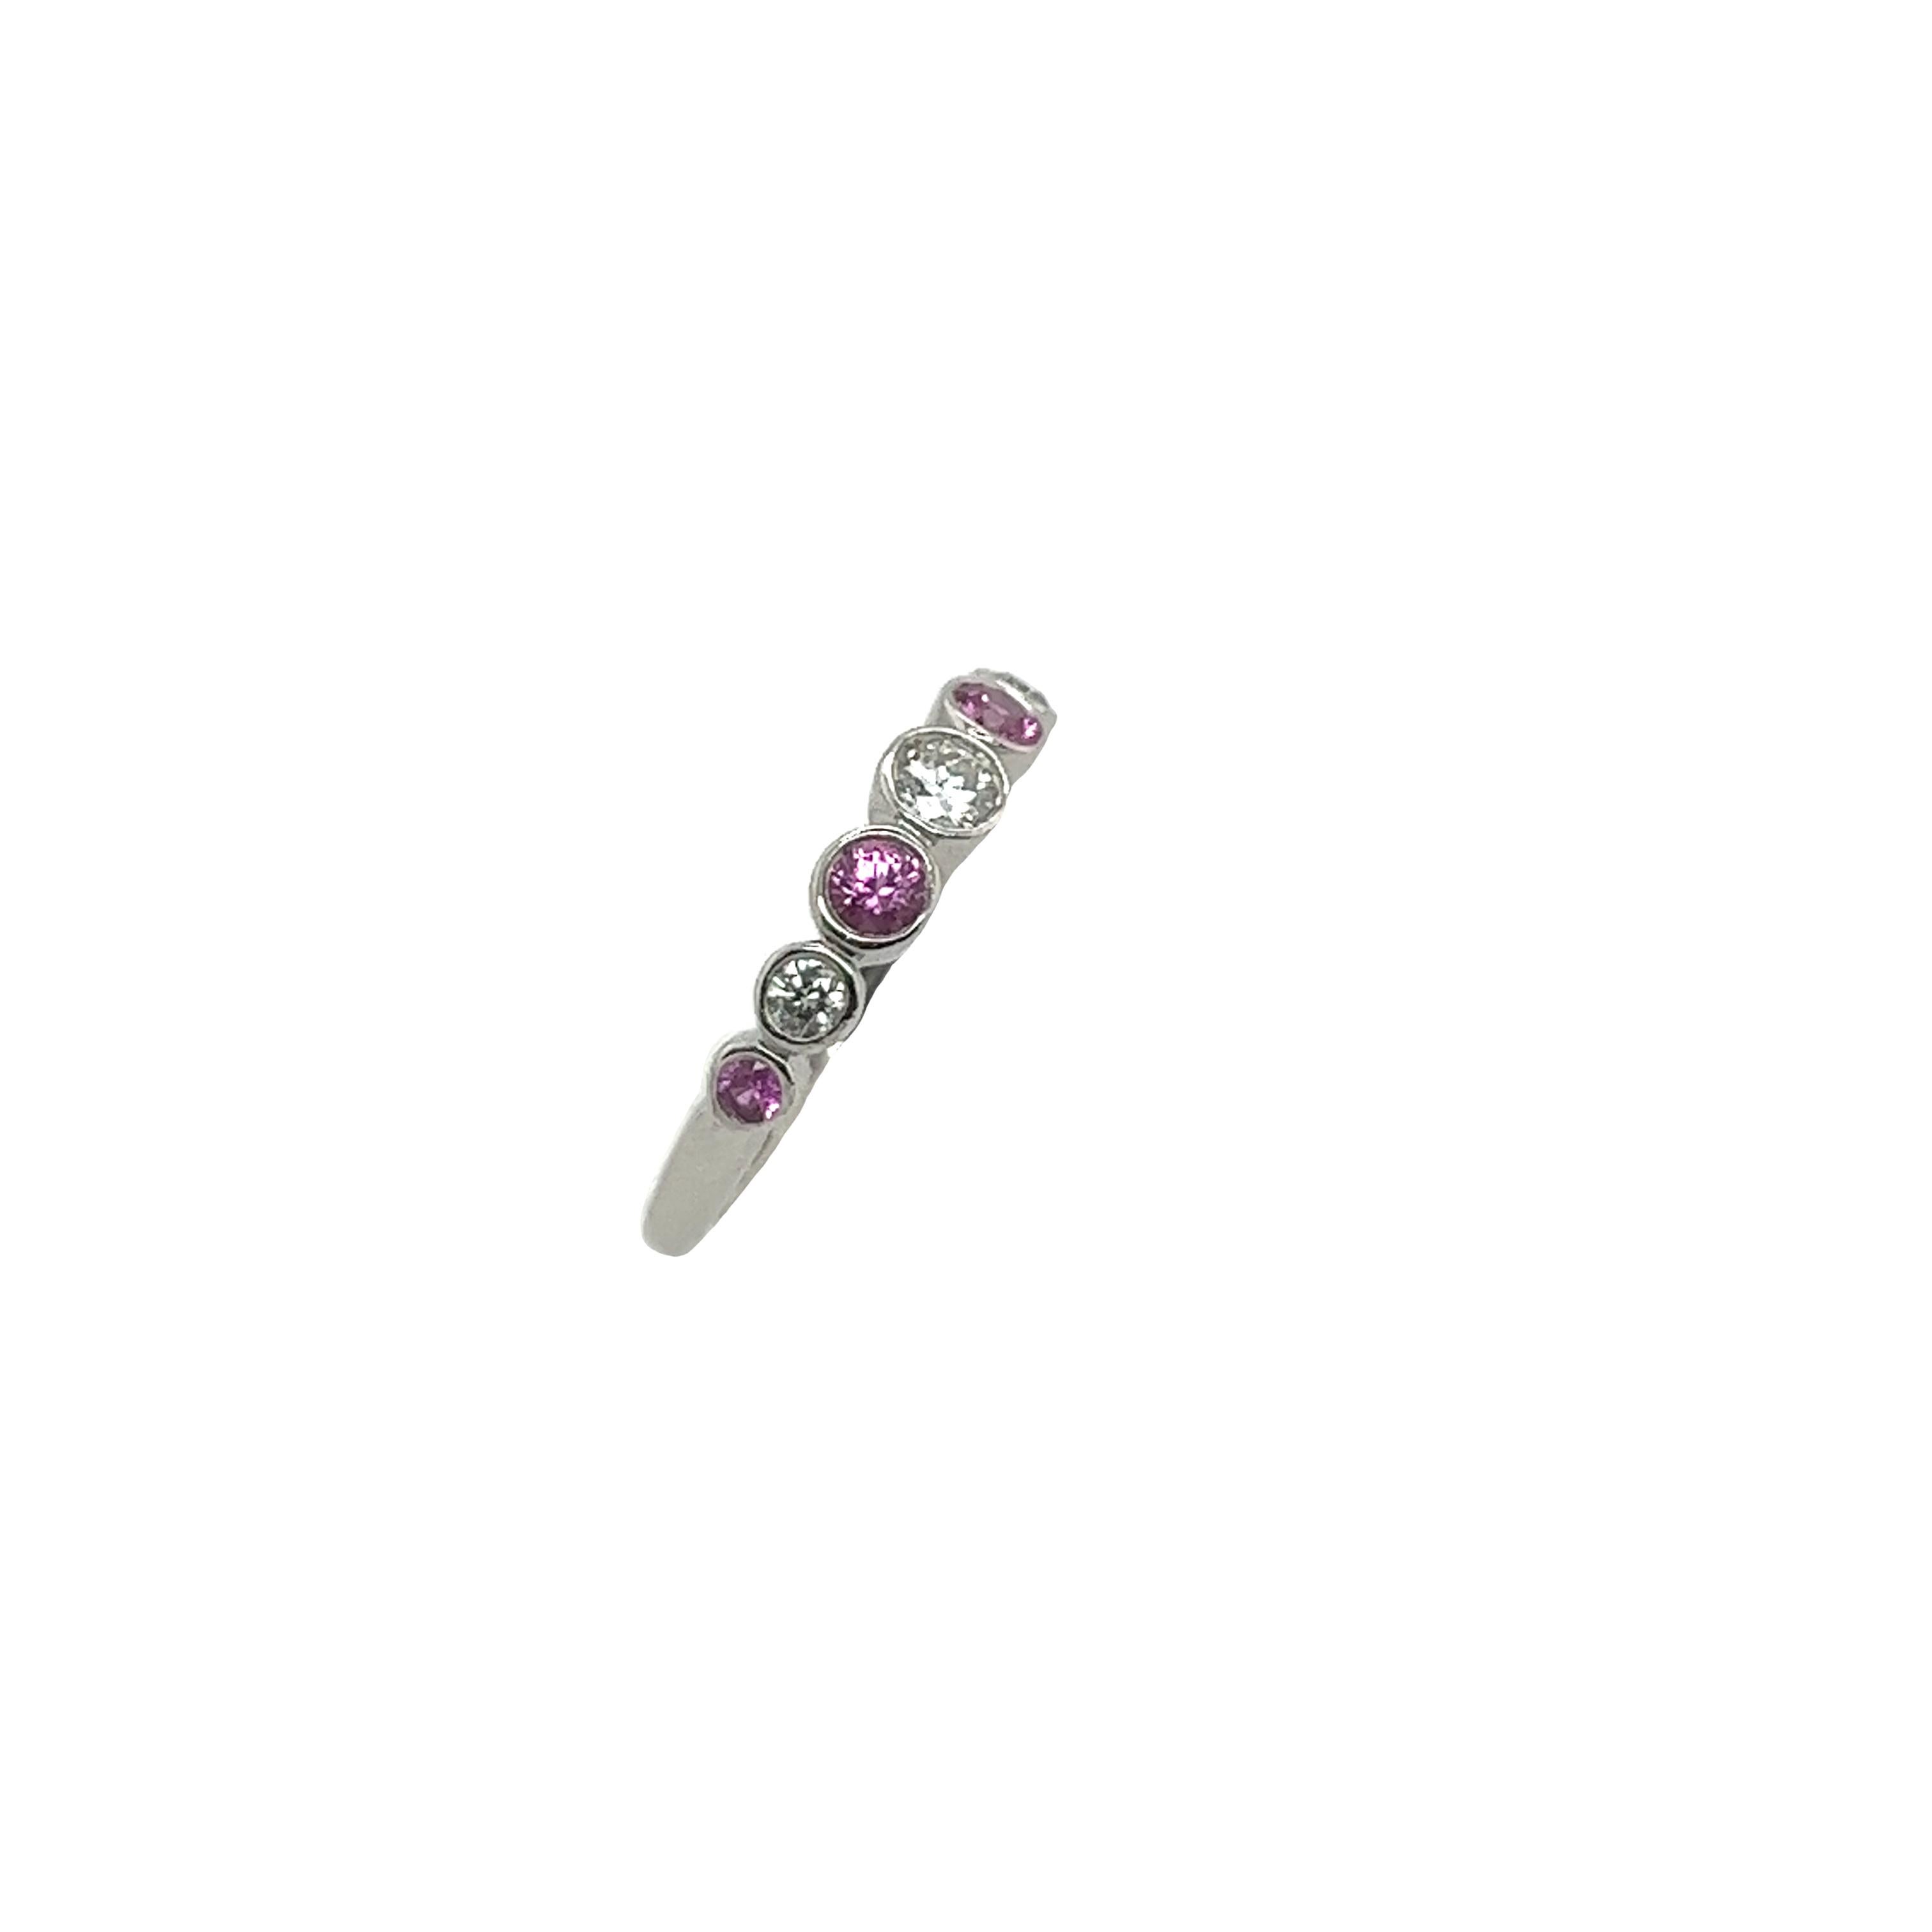 Tiffany & Co. Jazz ring set with 3 Diamonds &4 Pink Sapphires in a graduated set For Sale 1